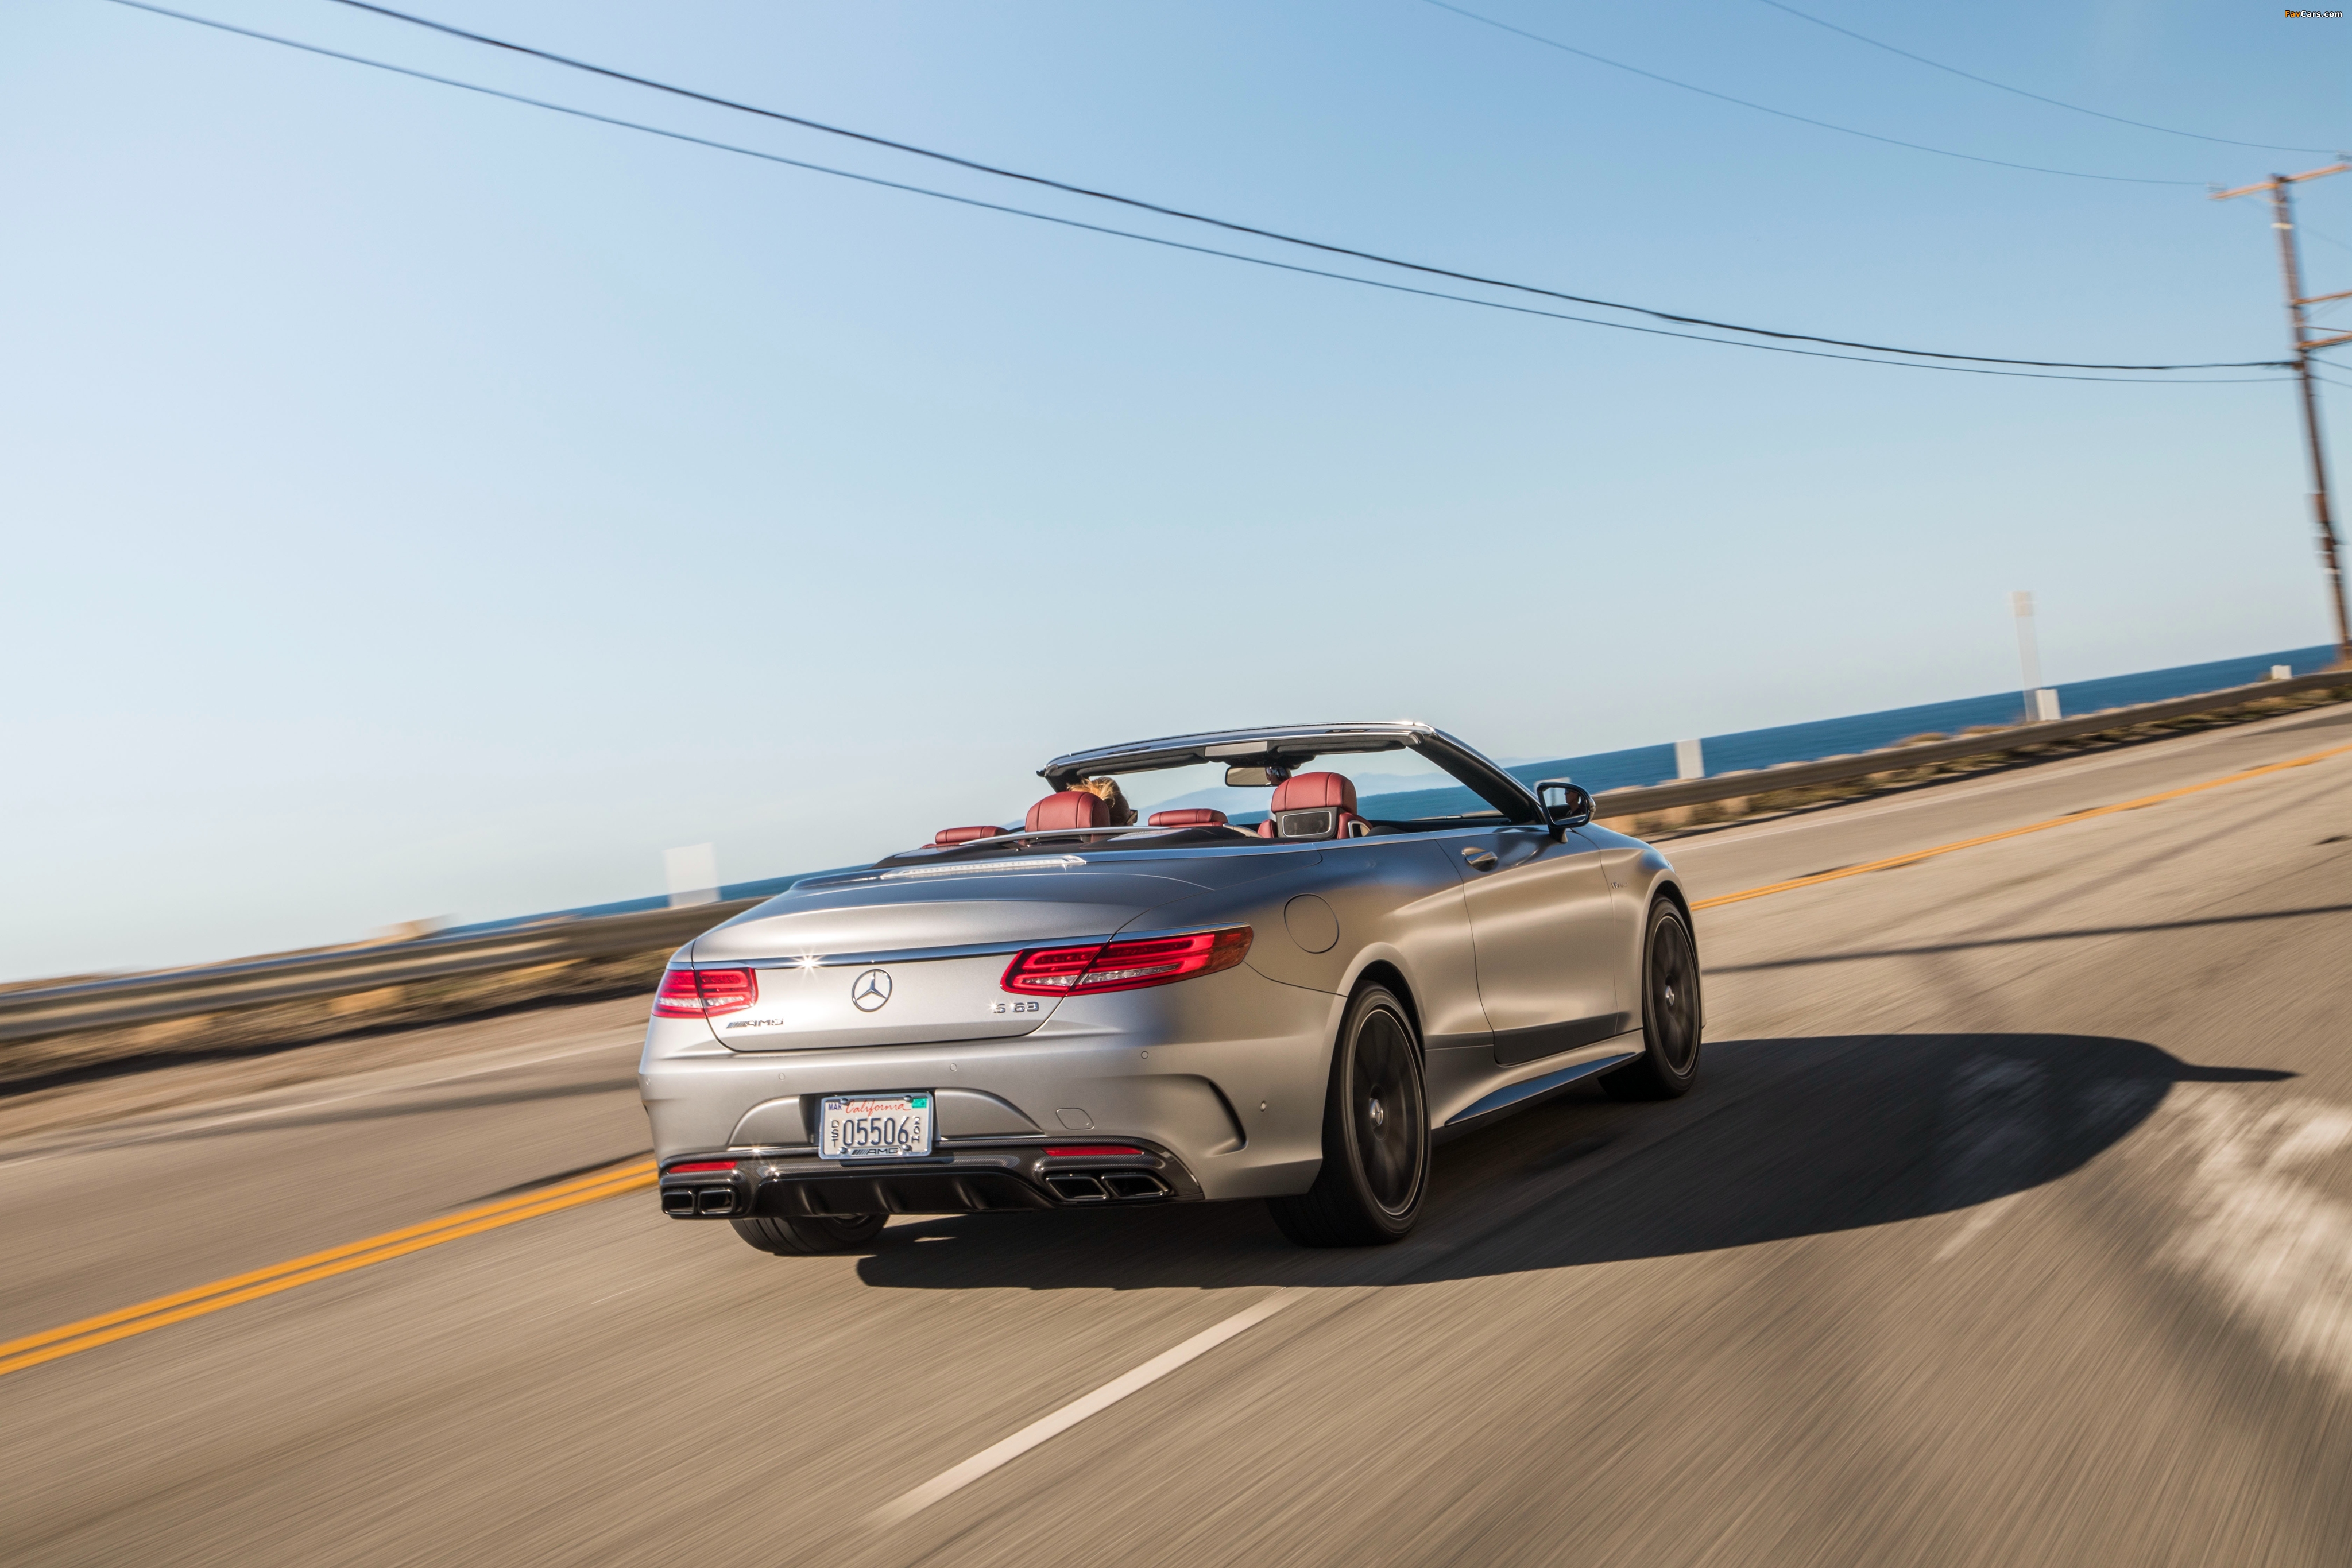 Mercedes-AMG S 63 Cabriolet North America (A217) 2016 images (4096 x 2731)